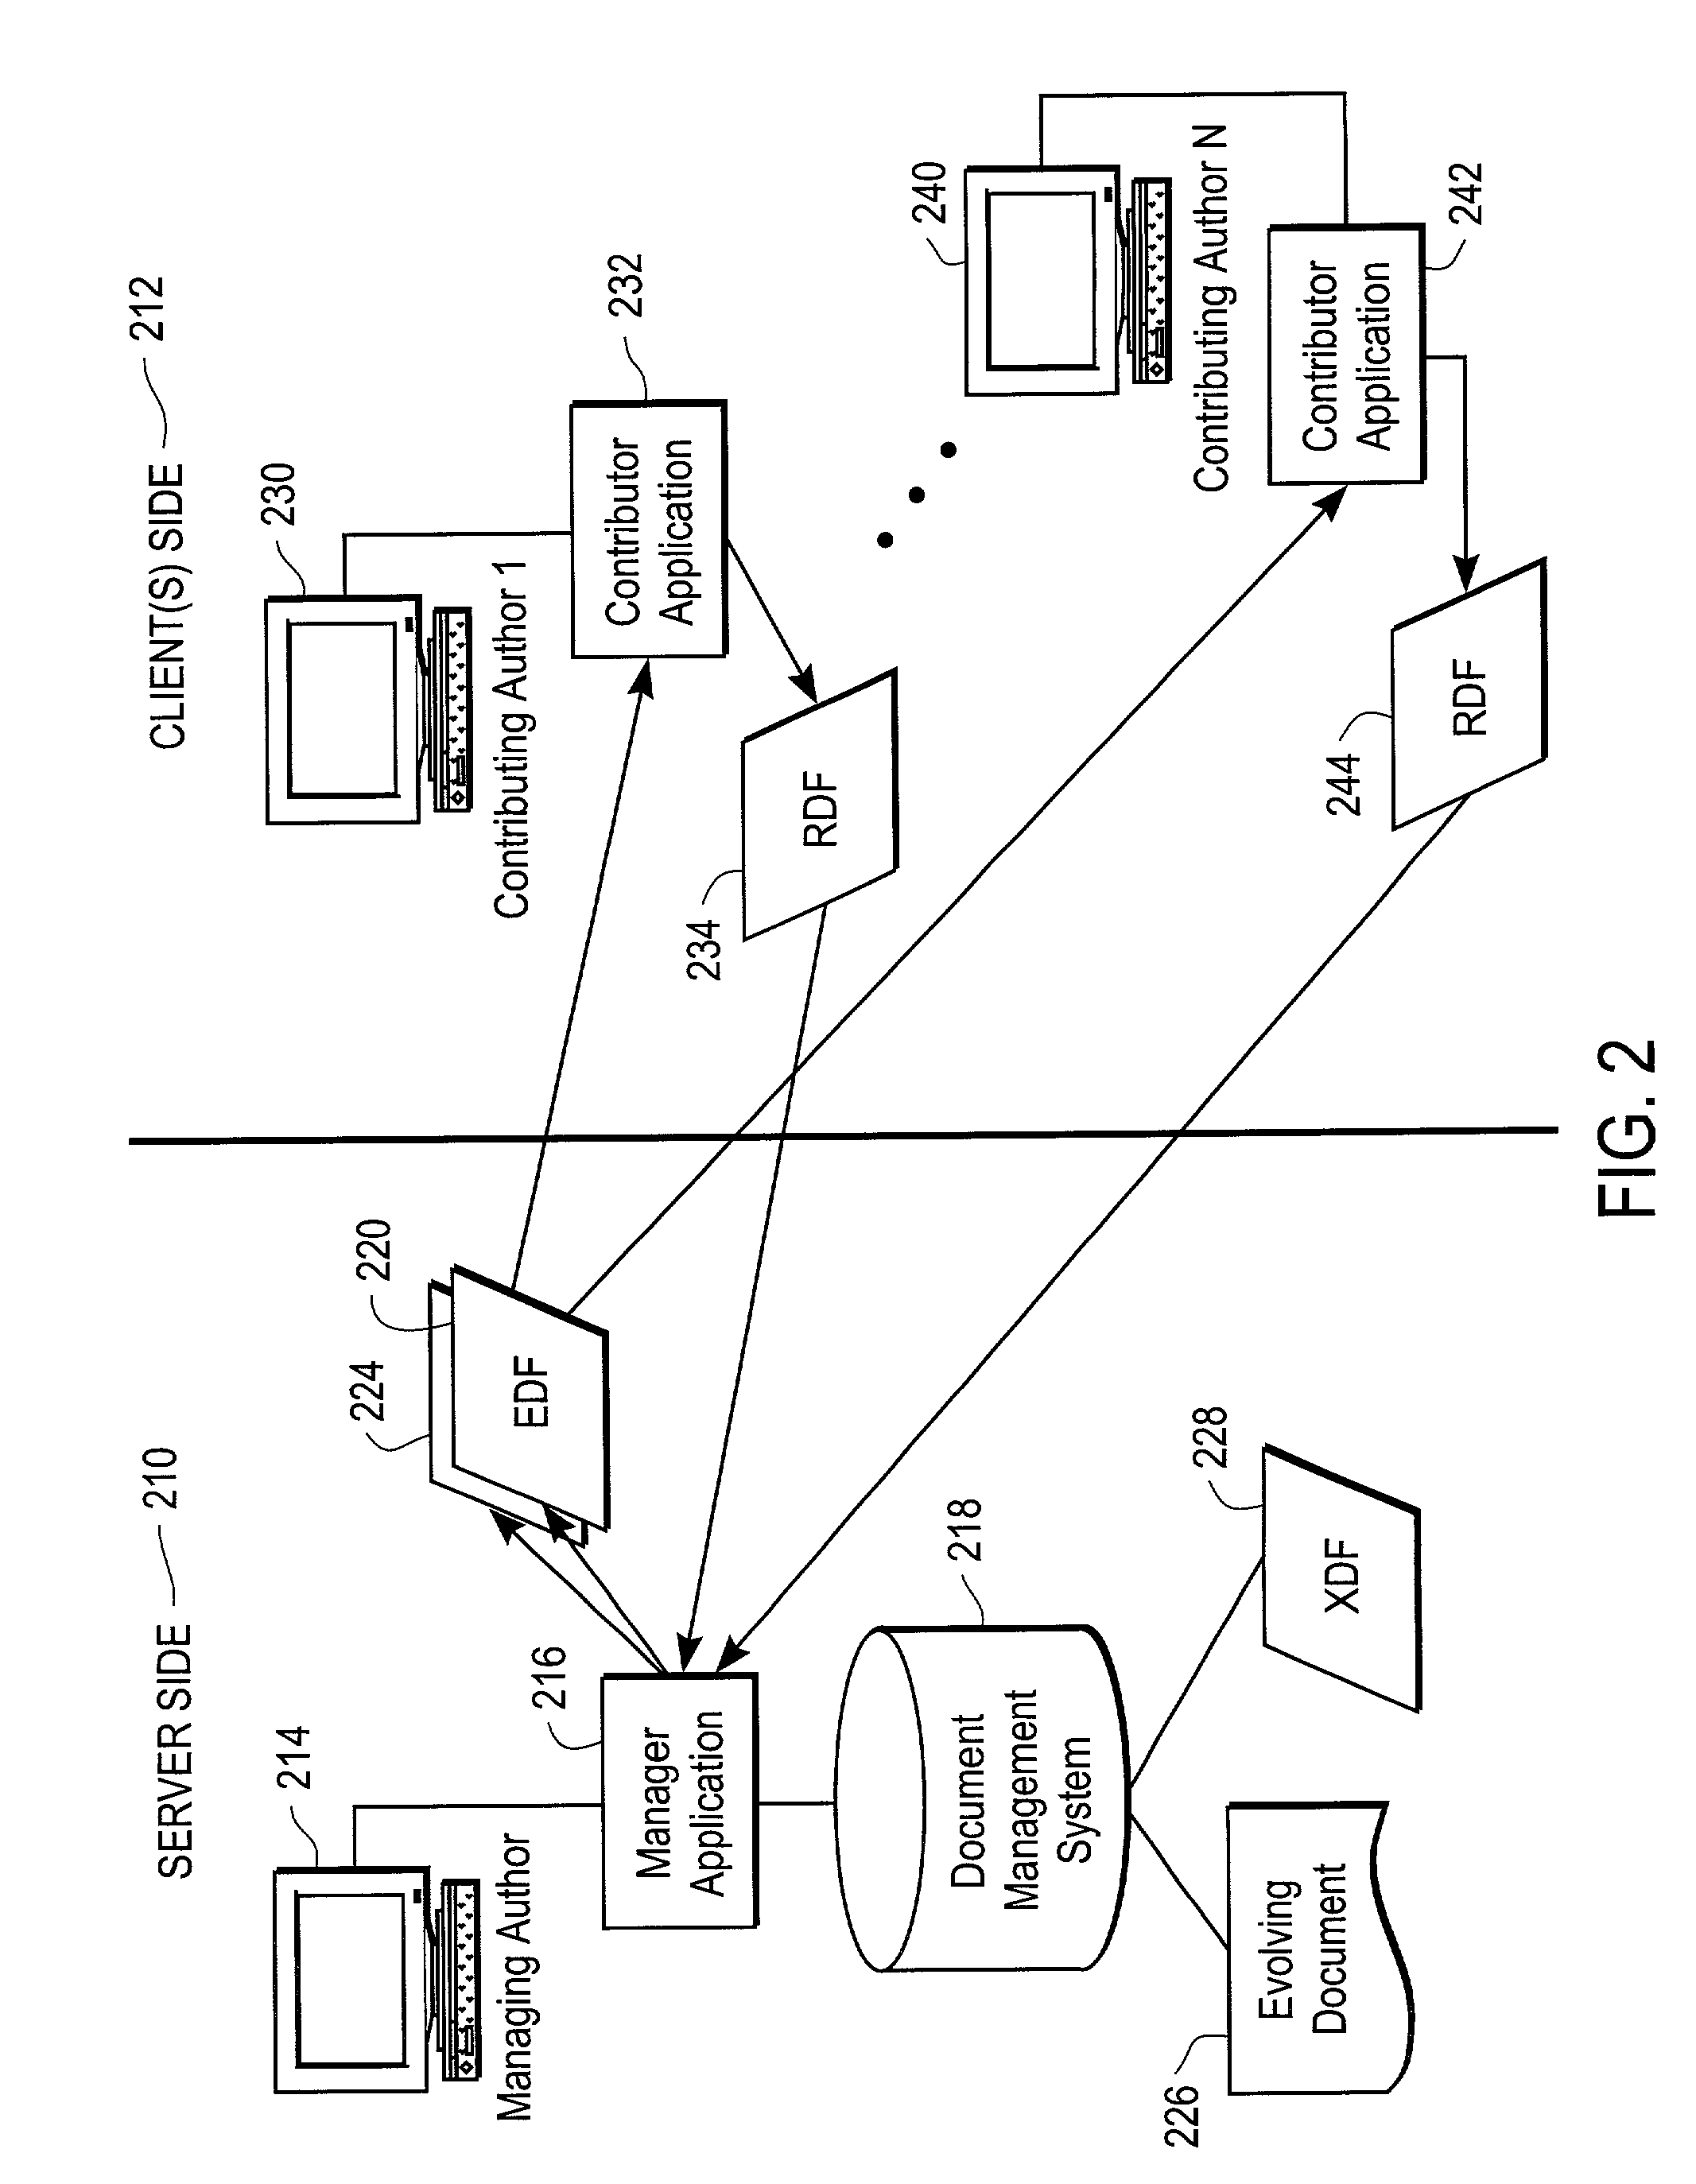 Method and system for document collaboration